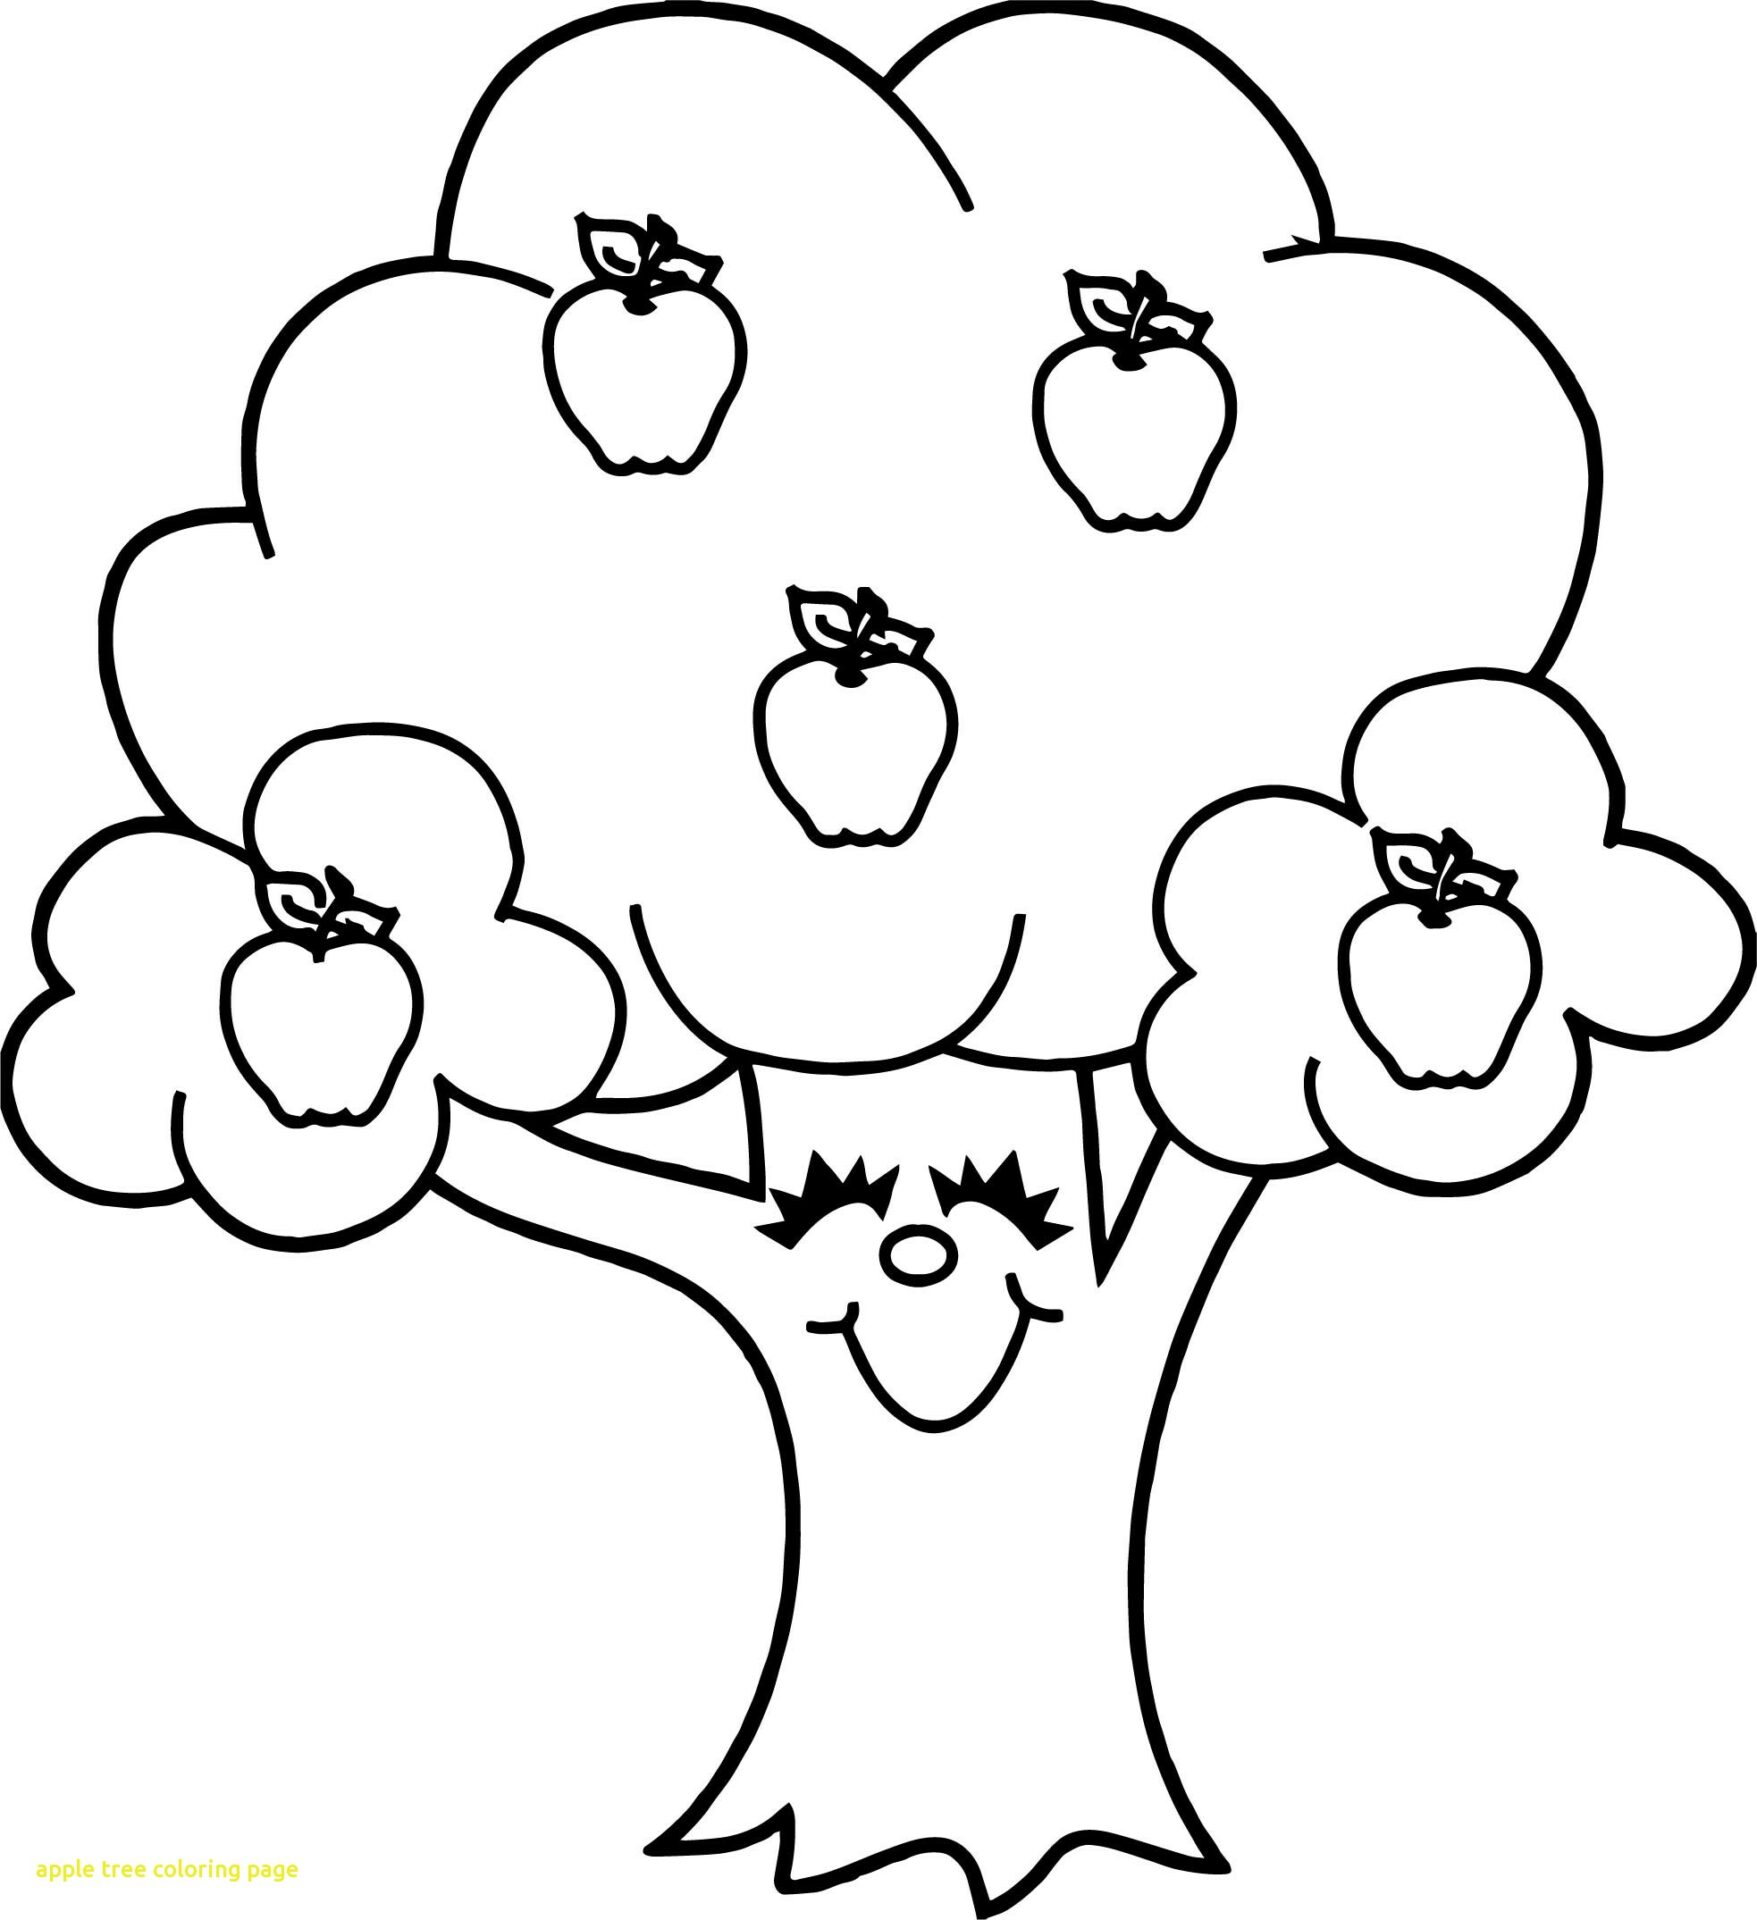 Download Cute Apple Tree Coloring Page Free Printable Coloring Pages For Kids